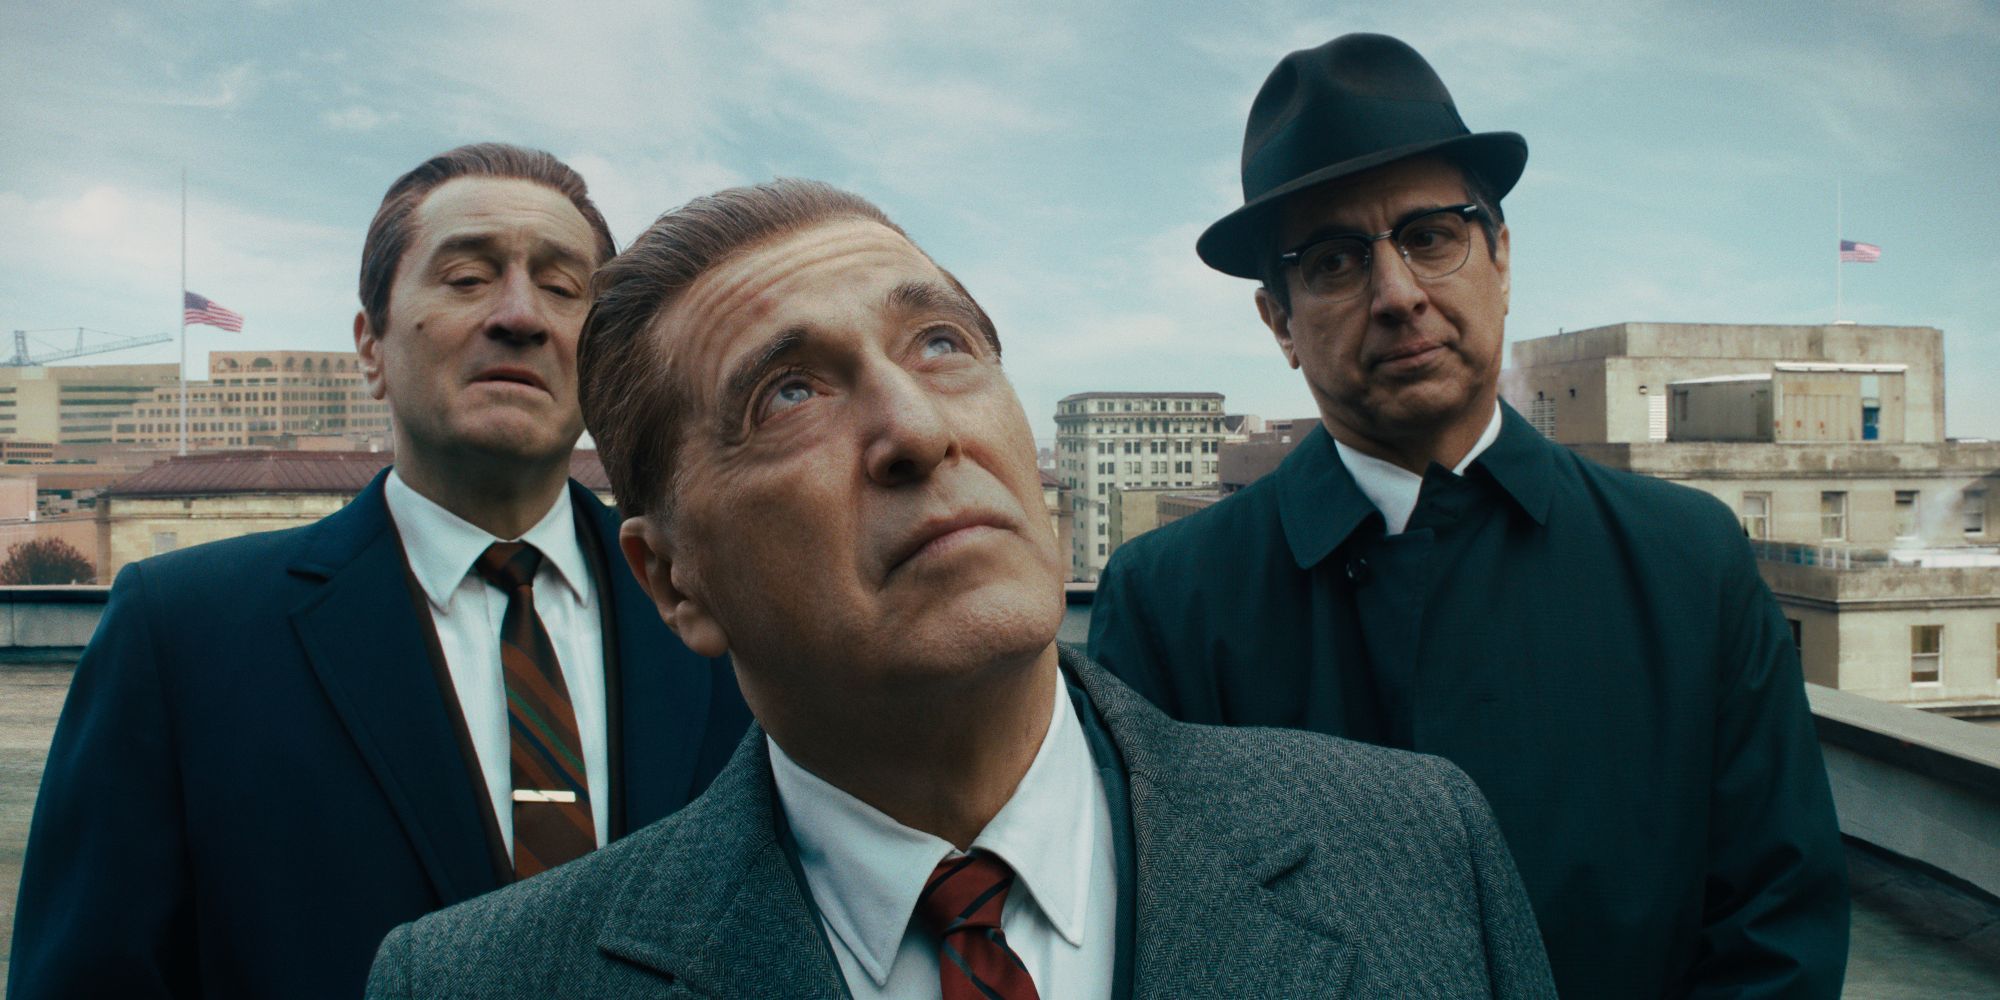 Jimmy Hoffa (Al Pacino) and two of his associates look up at a sign in 'The Irishman'.